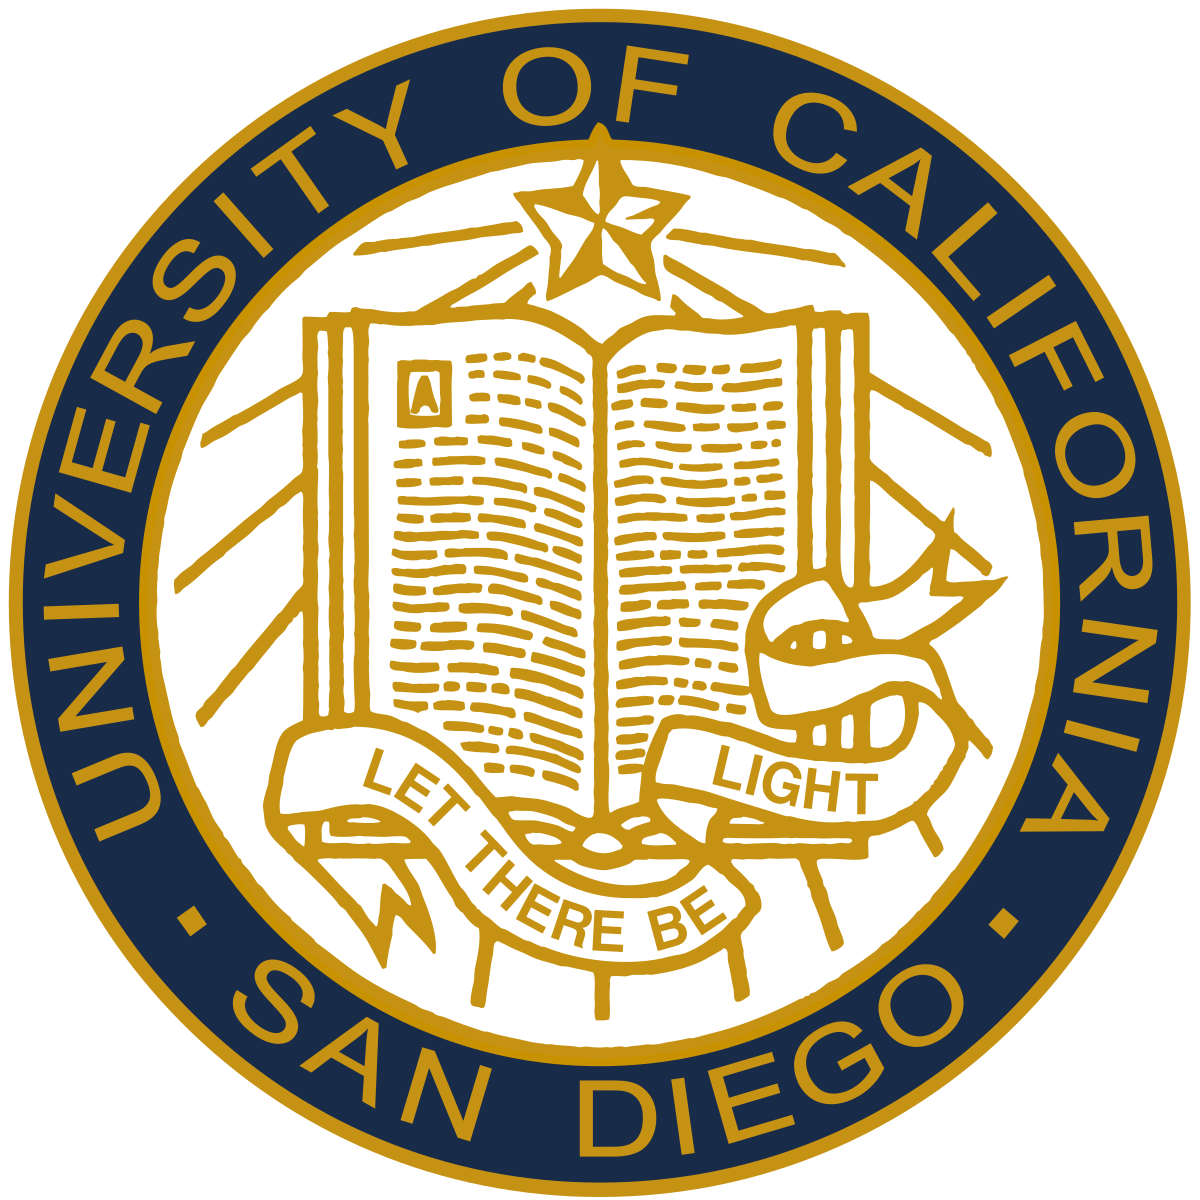 Seal_of_the_University_of_California,_San_Diego.svg.png